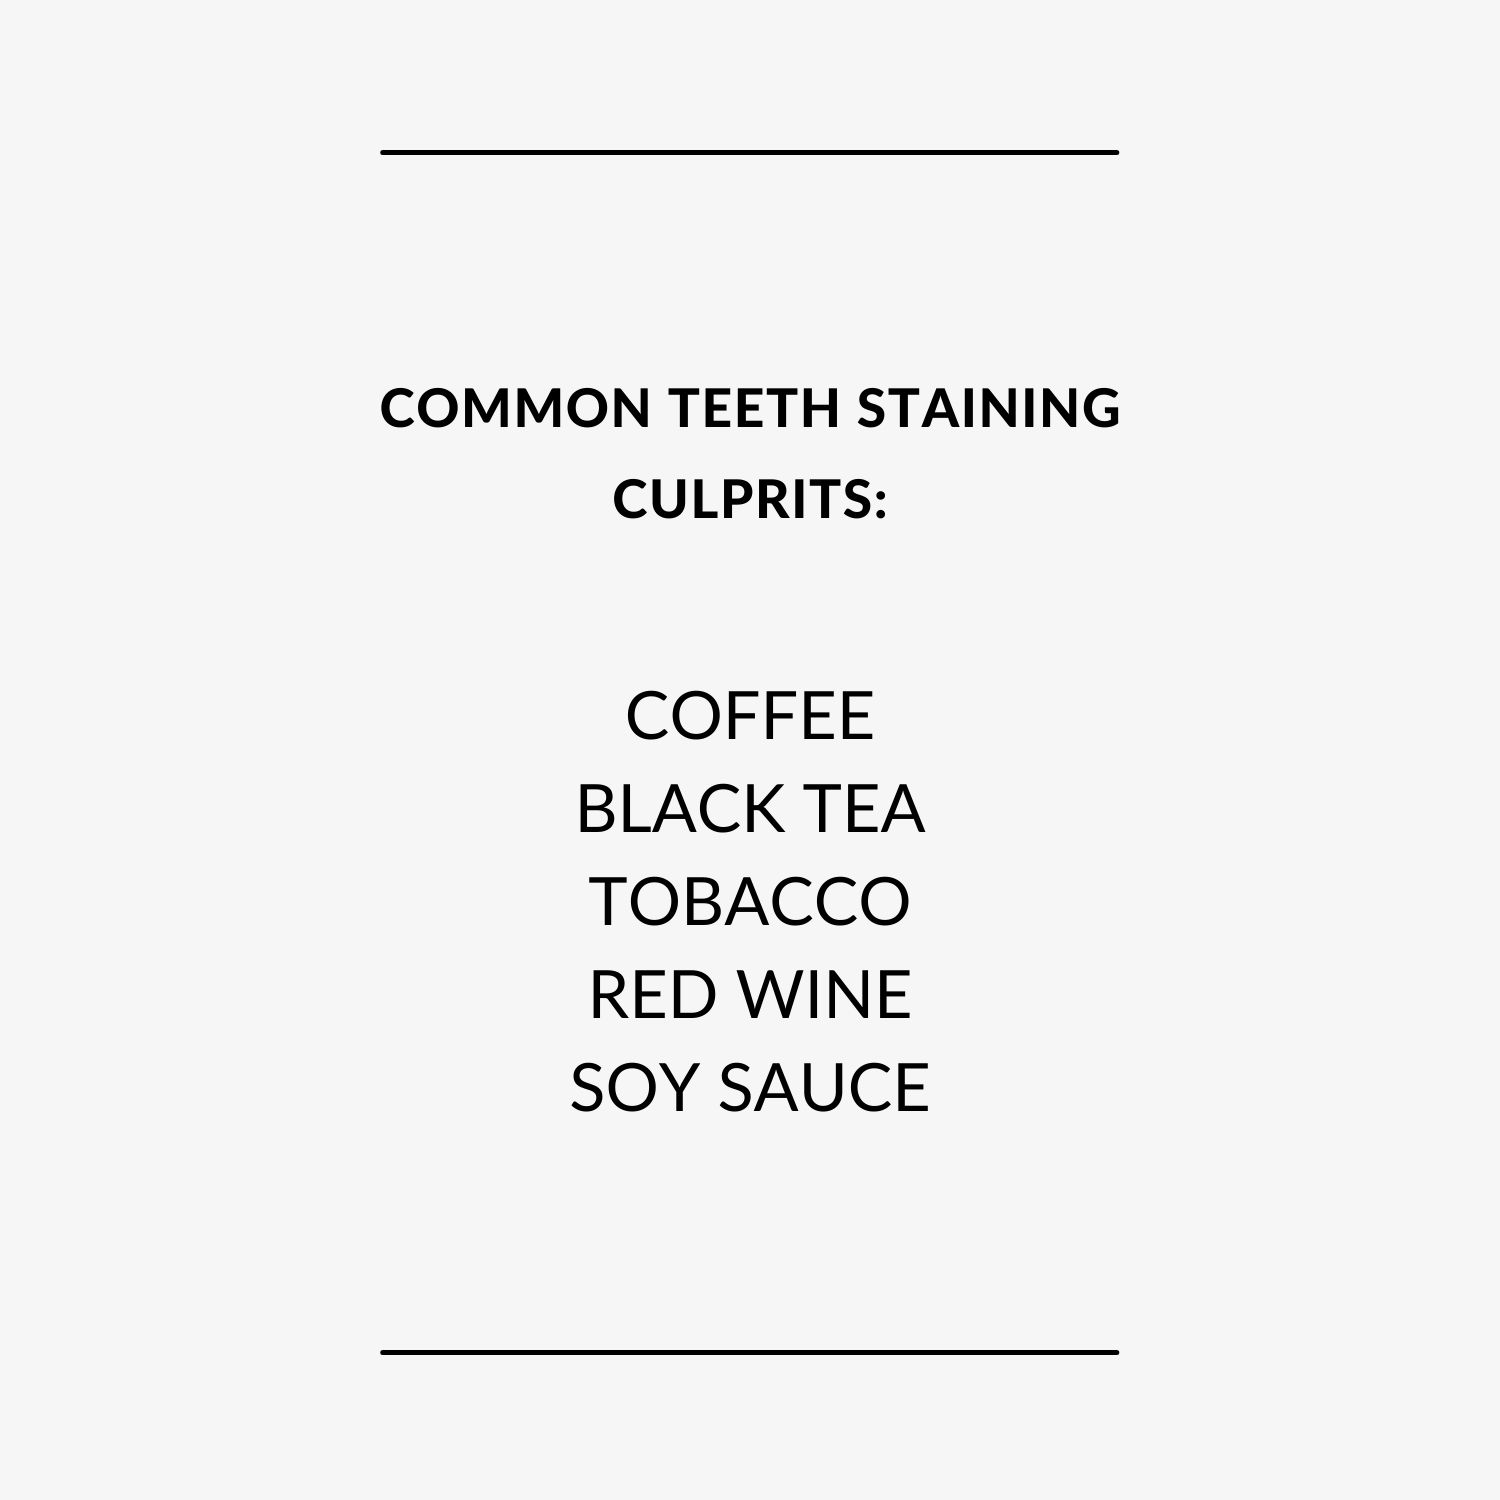 COMMON TEETH STAINING CULPRITS: Coffee, Black Tea, Tobacco, Red Wine, Soy Sauce